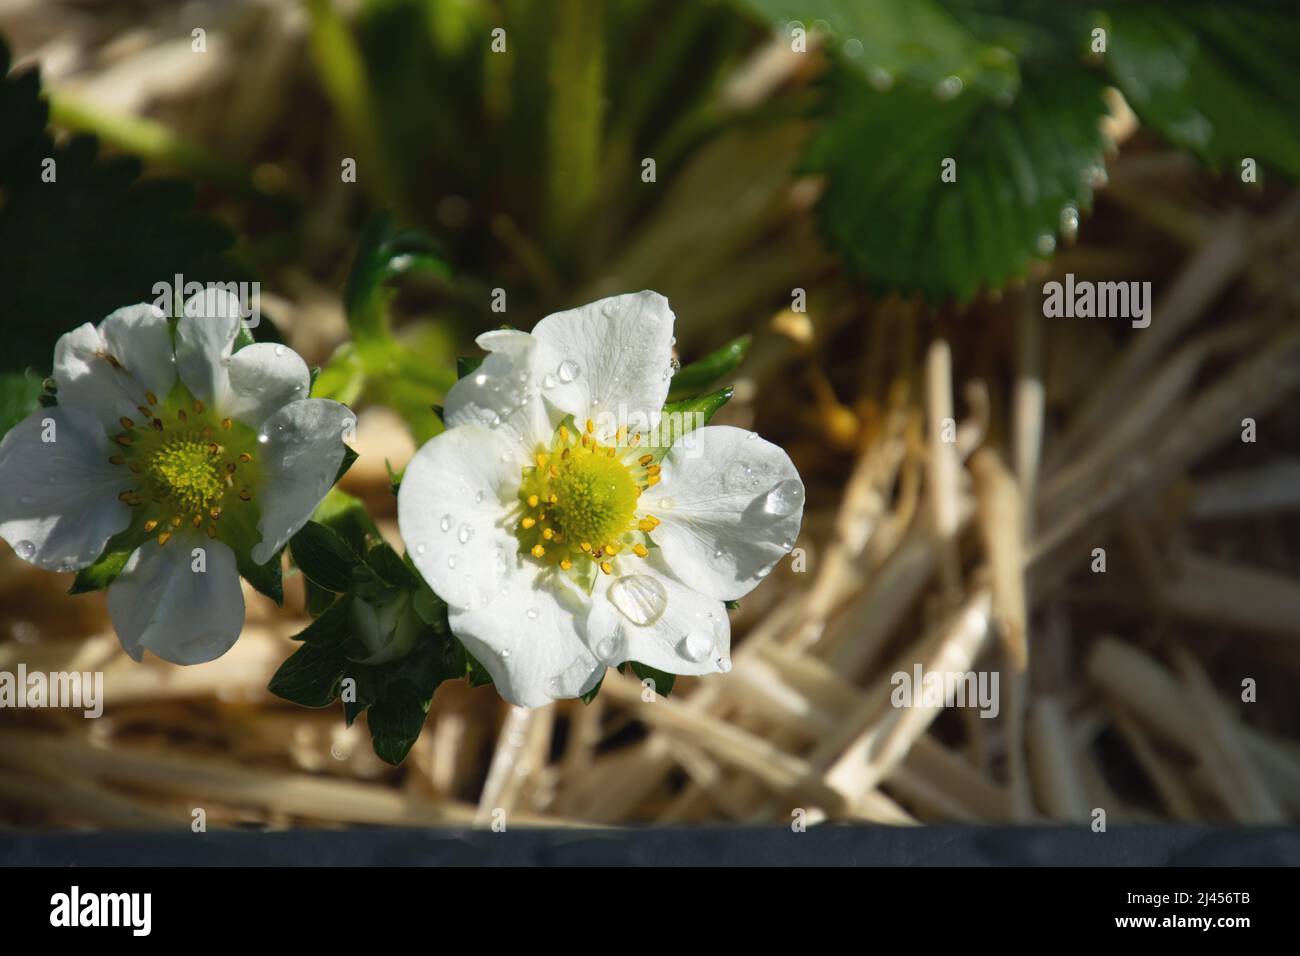 white flowering strawberry plant with dewdrops in the warm spring sun Stock Photo